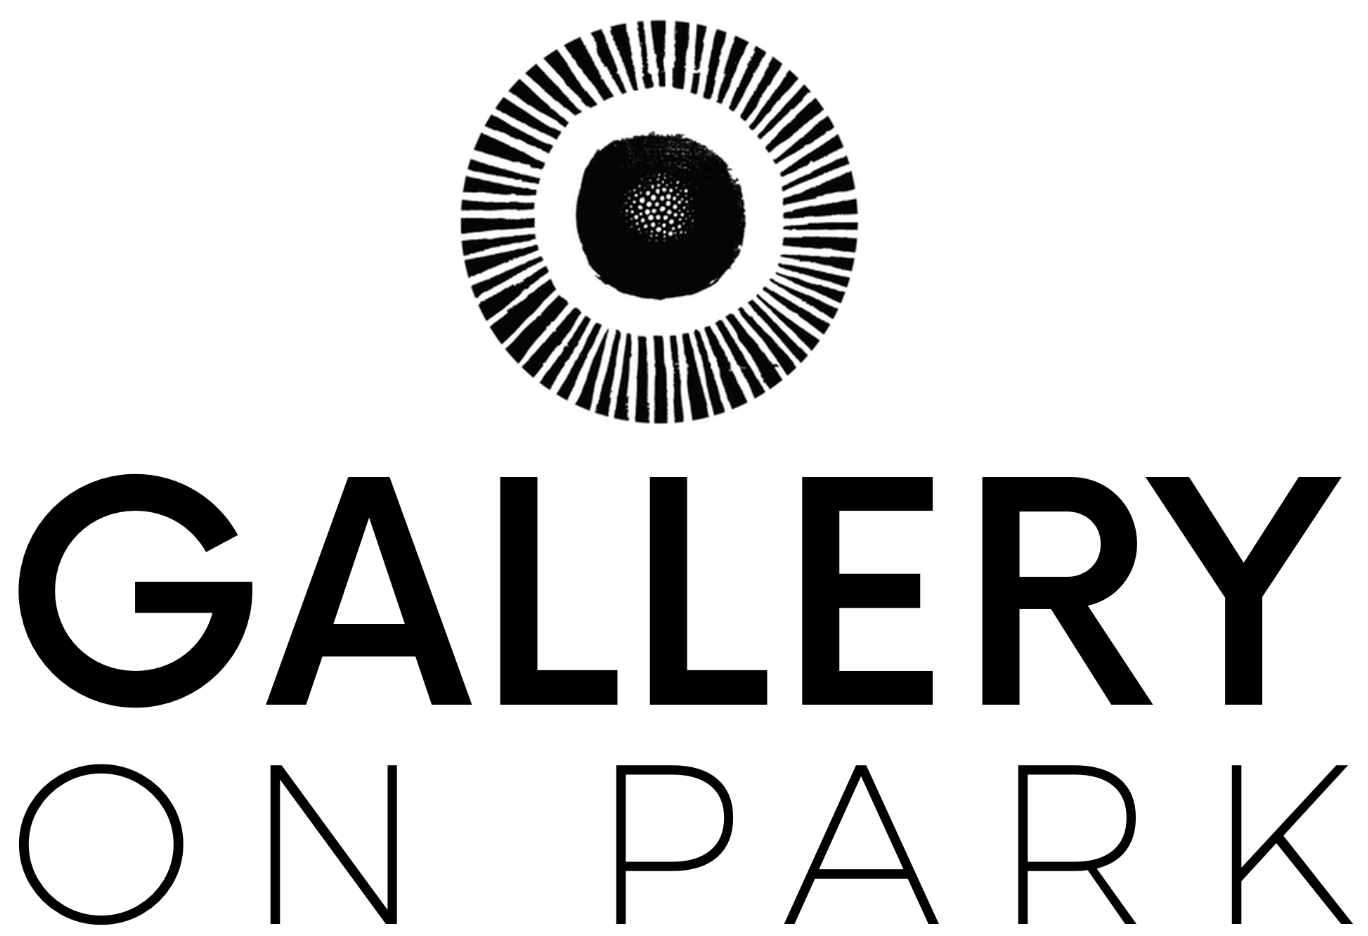 Gallery on Park